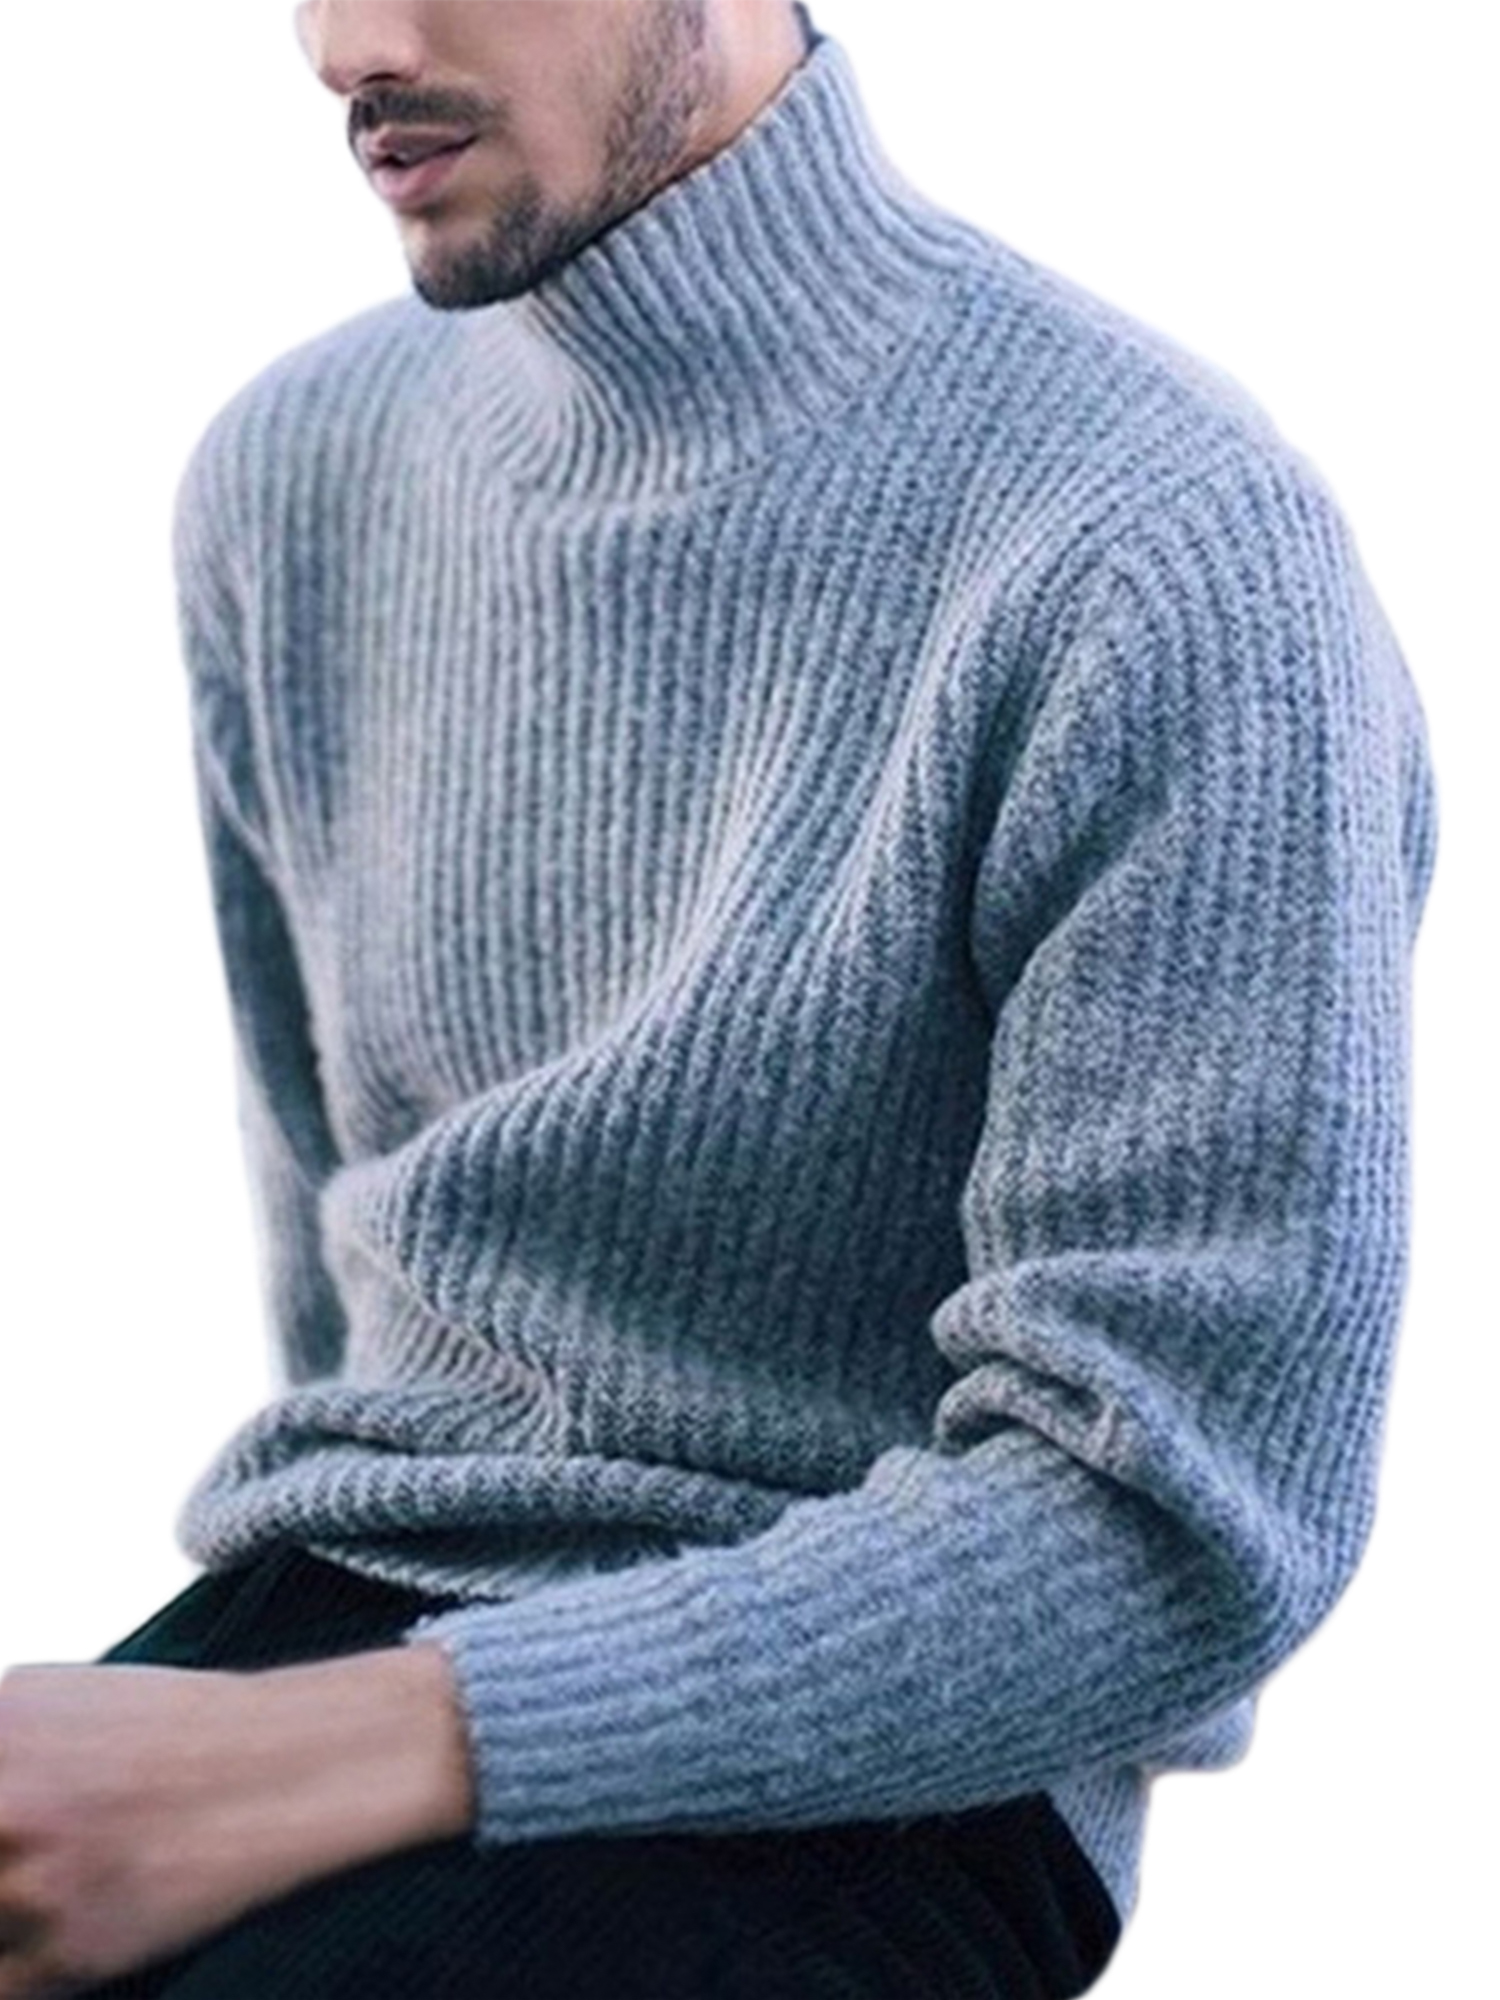 Details about  / Men/'s winter sweaters your choice XXL